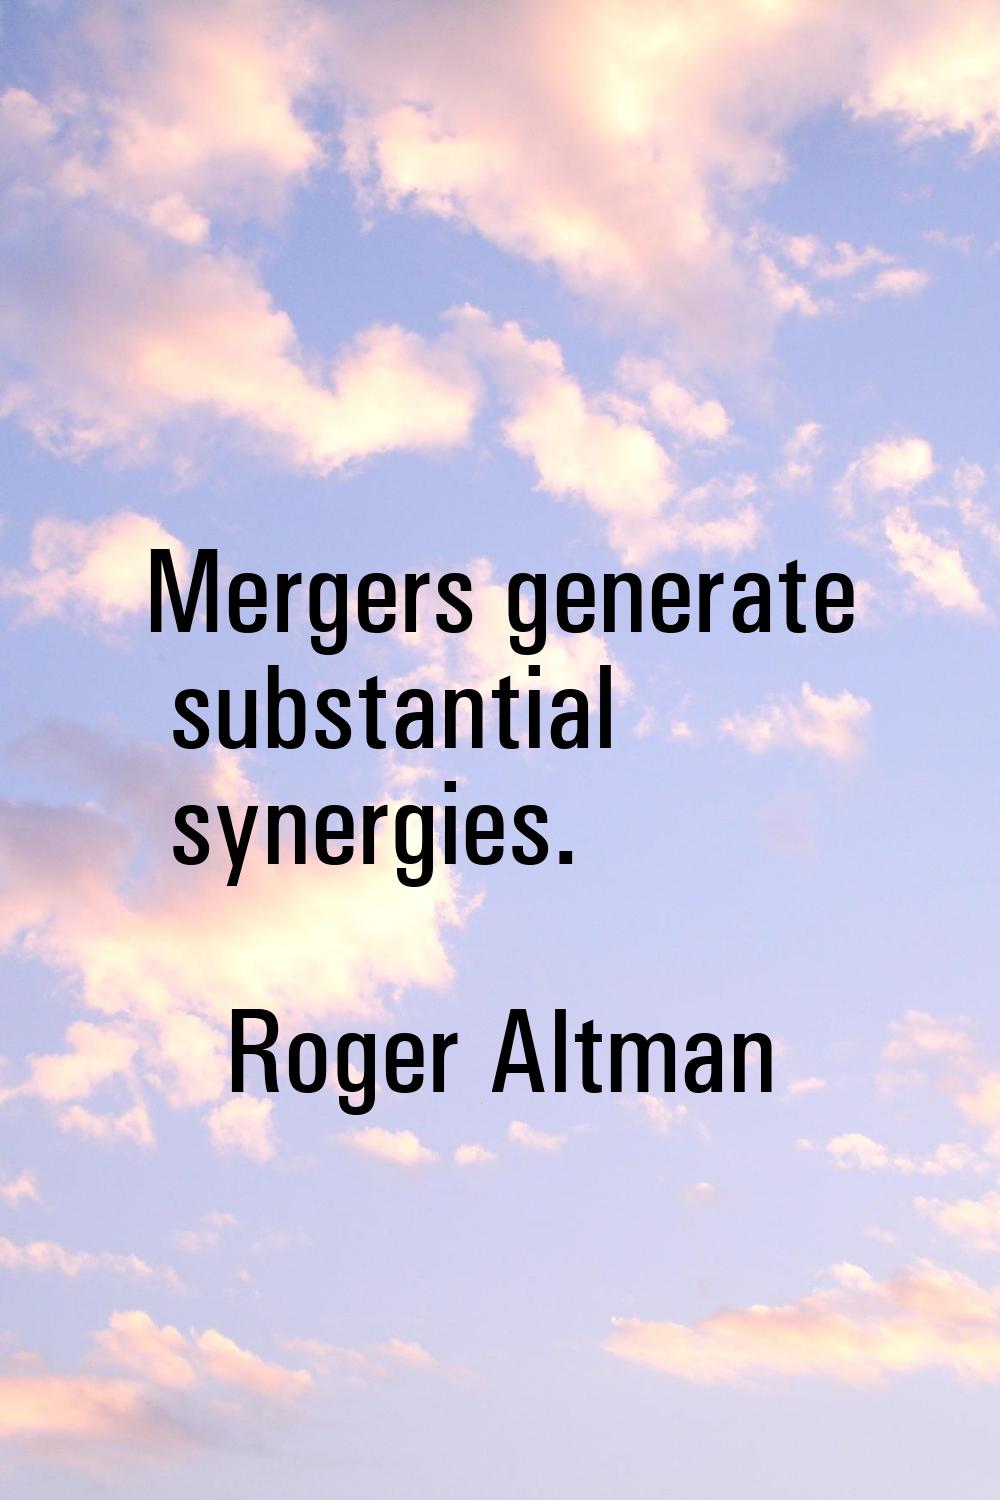 Mergers generate substantial synergies.